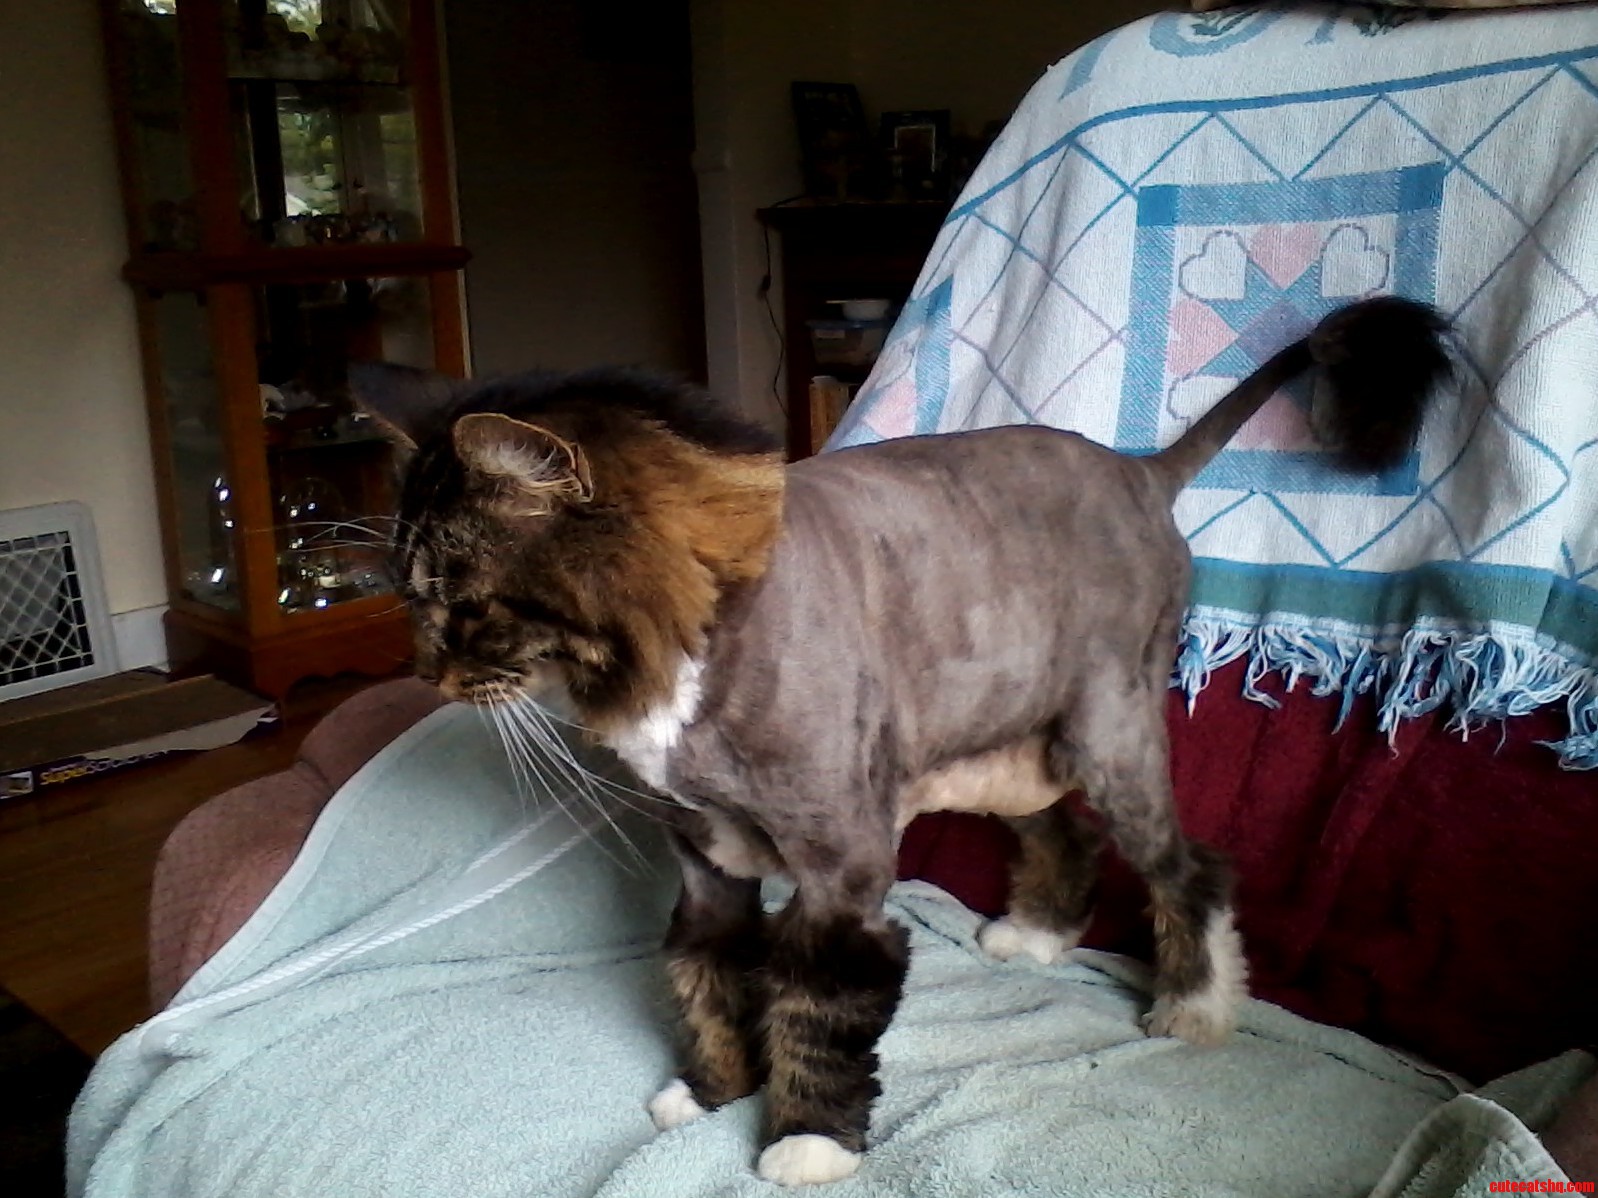 My Mothers Cat Had A Severe Run-In With Some Clippers Today.